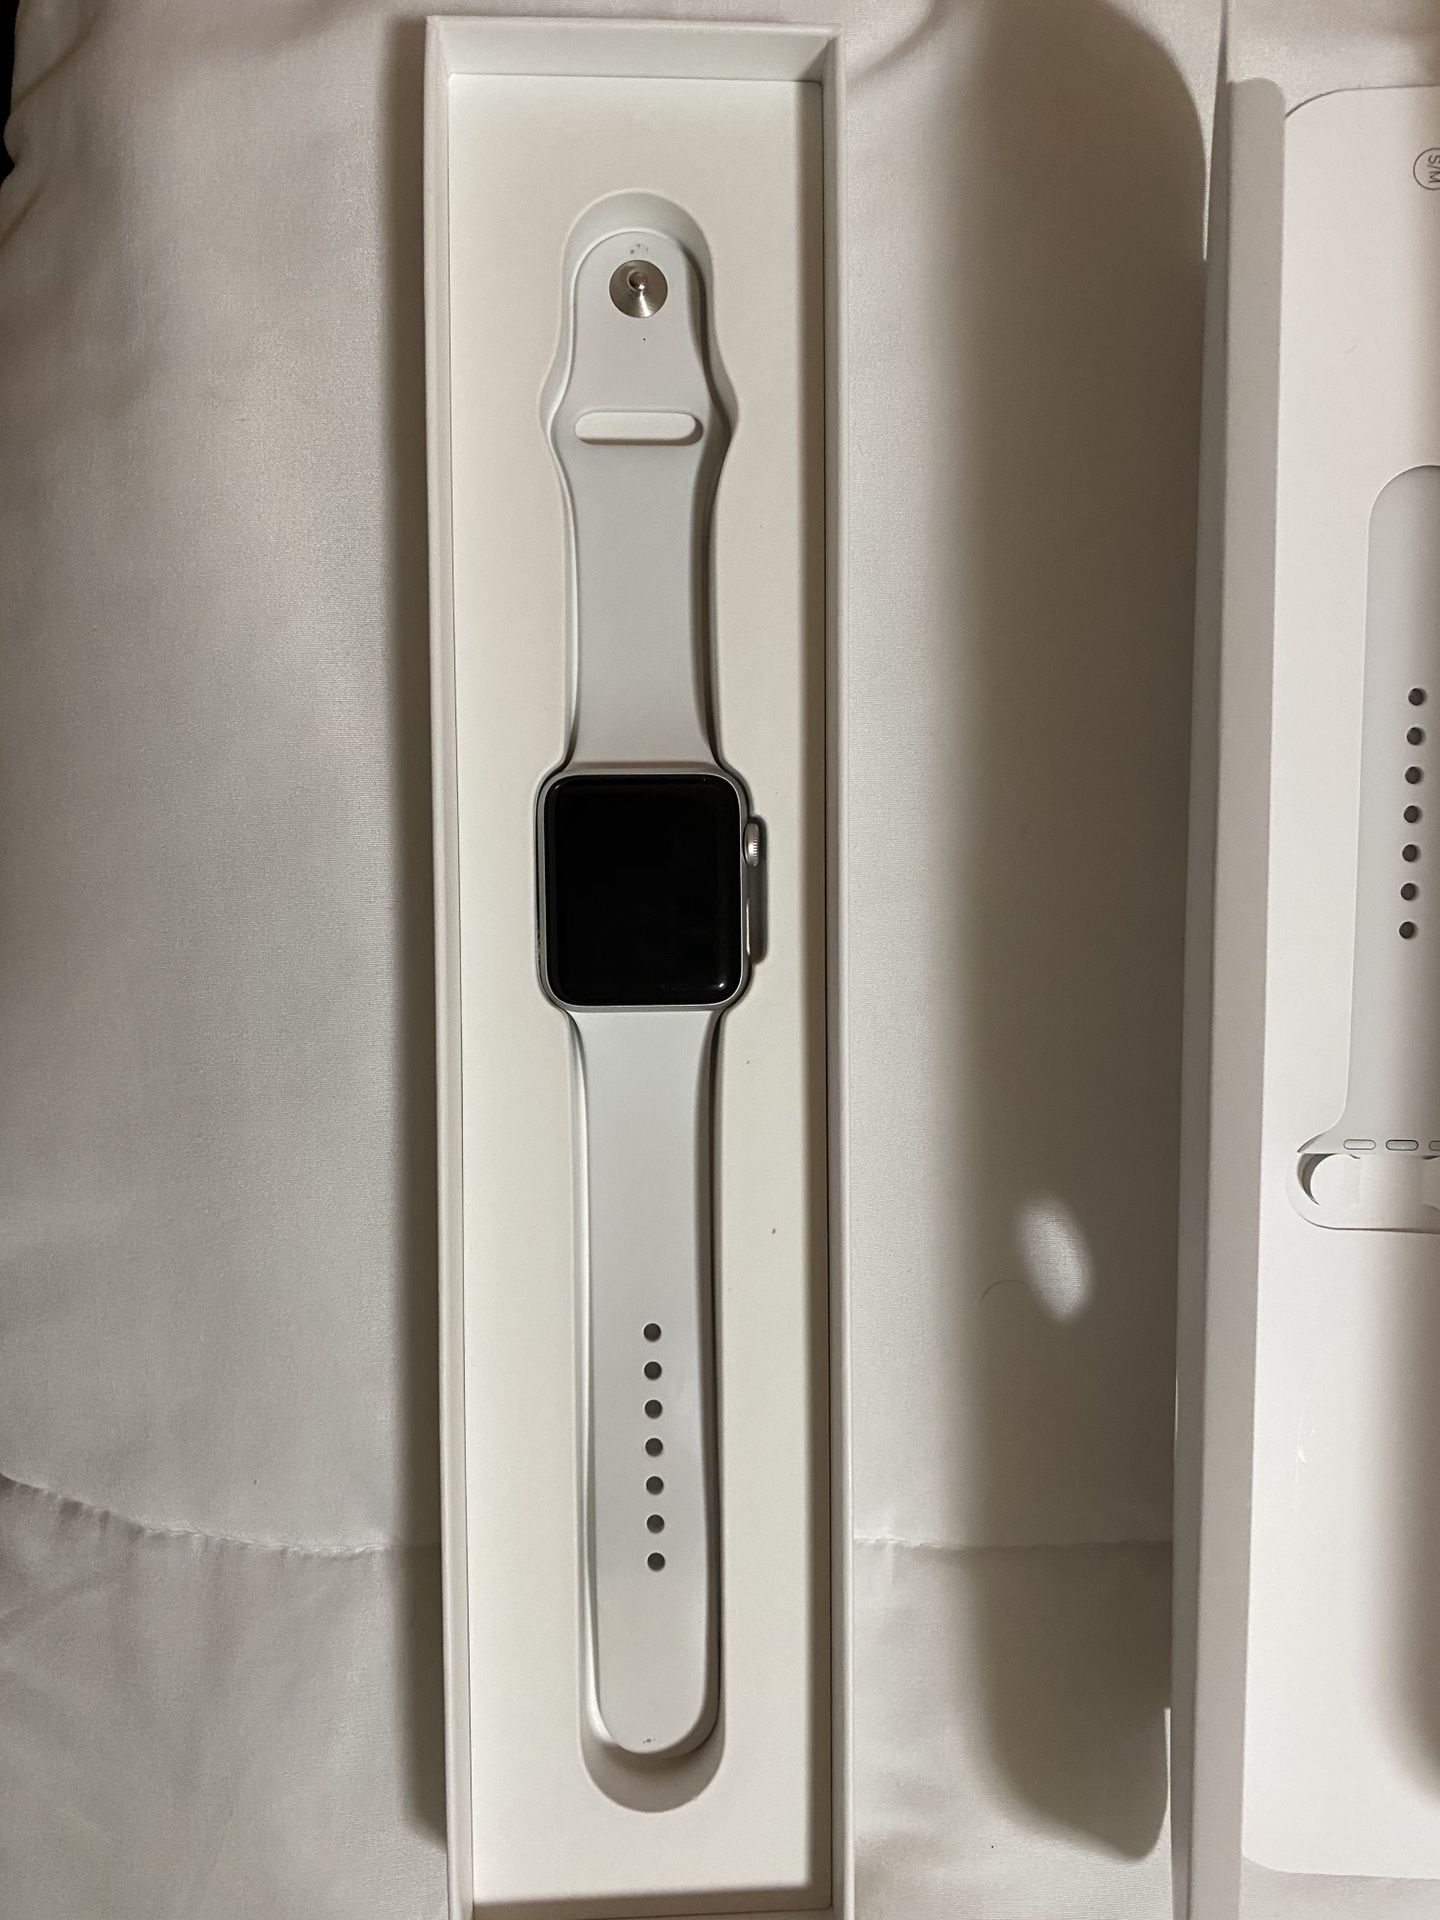 Apple Watch Series 3 with extra bands